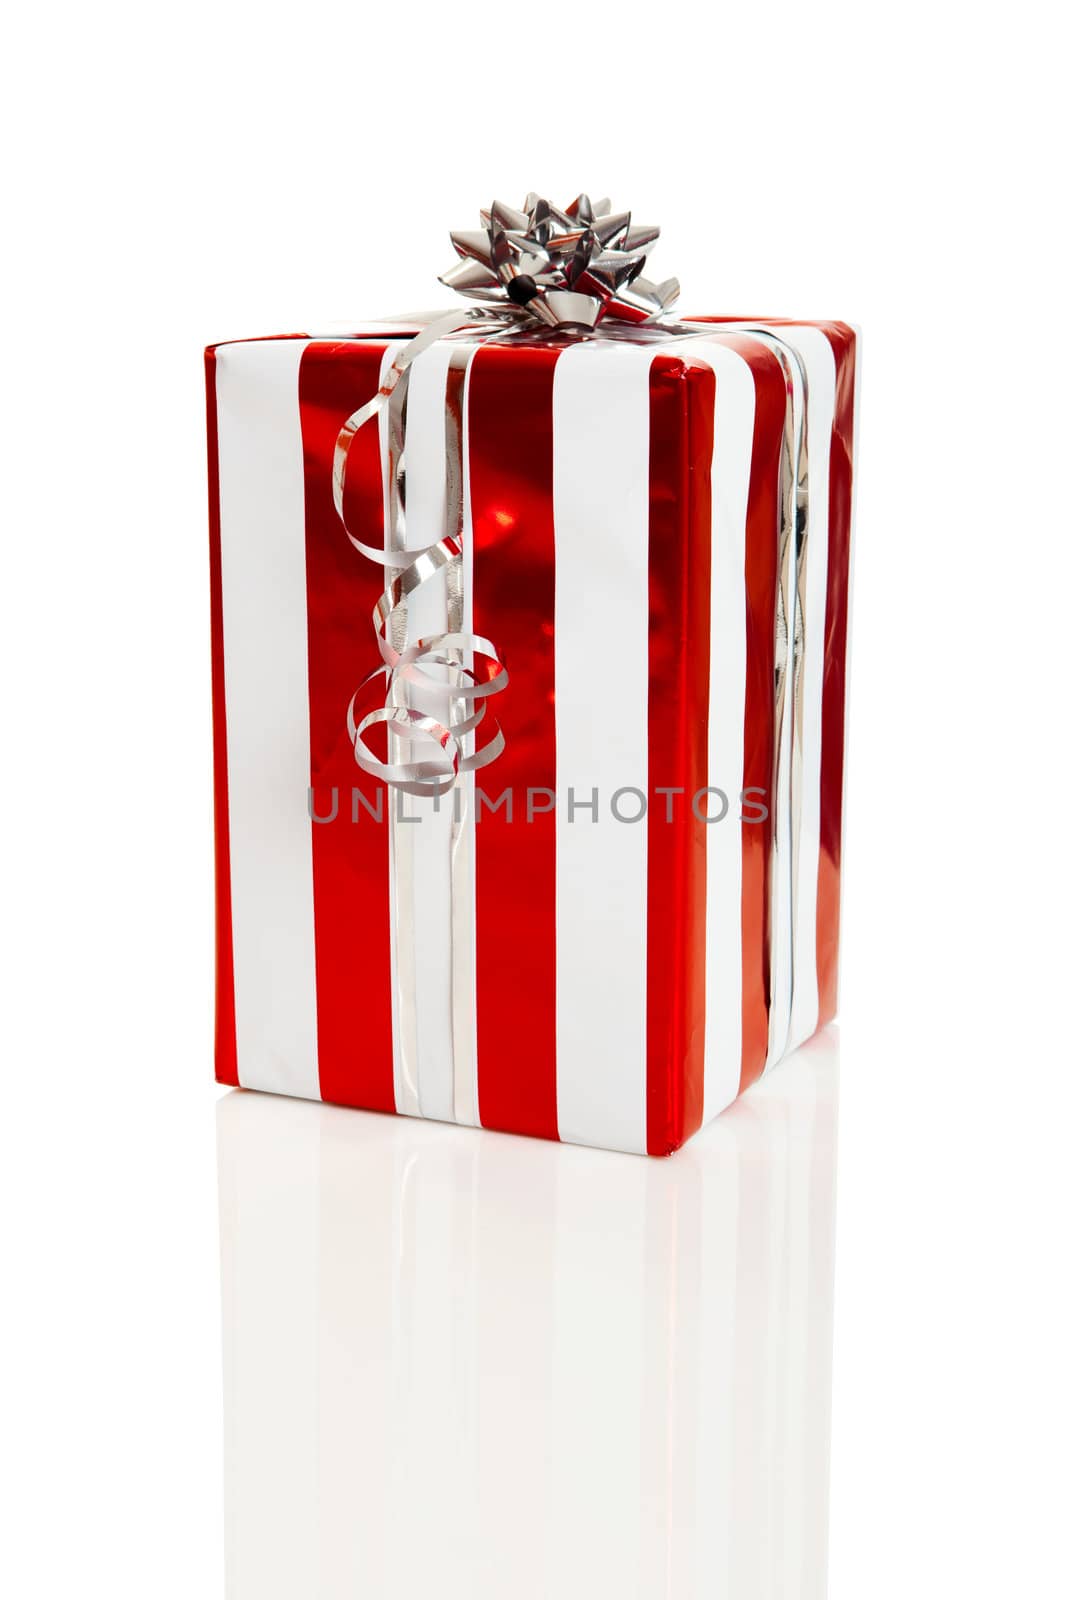 Christmas gifts isolated on a white background